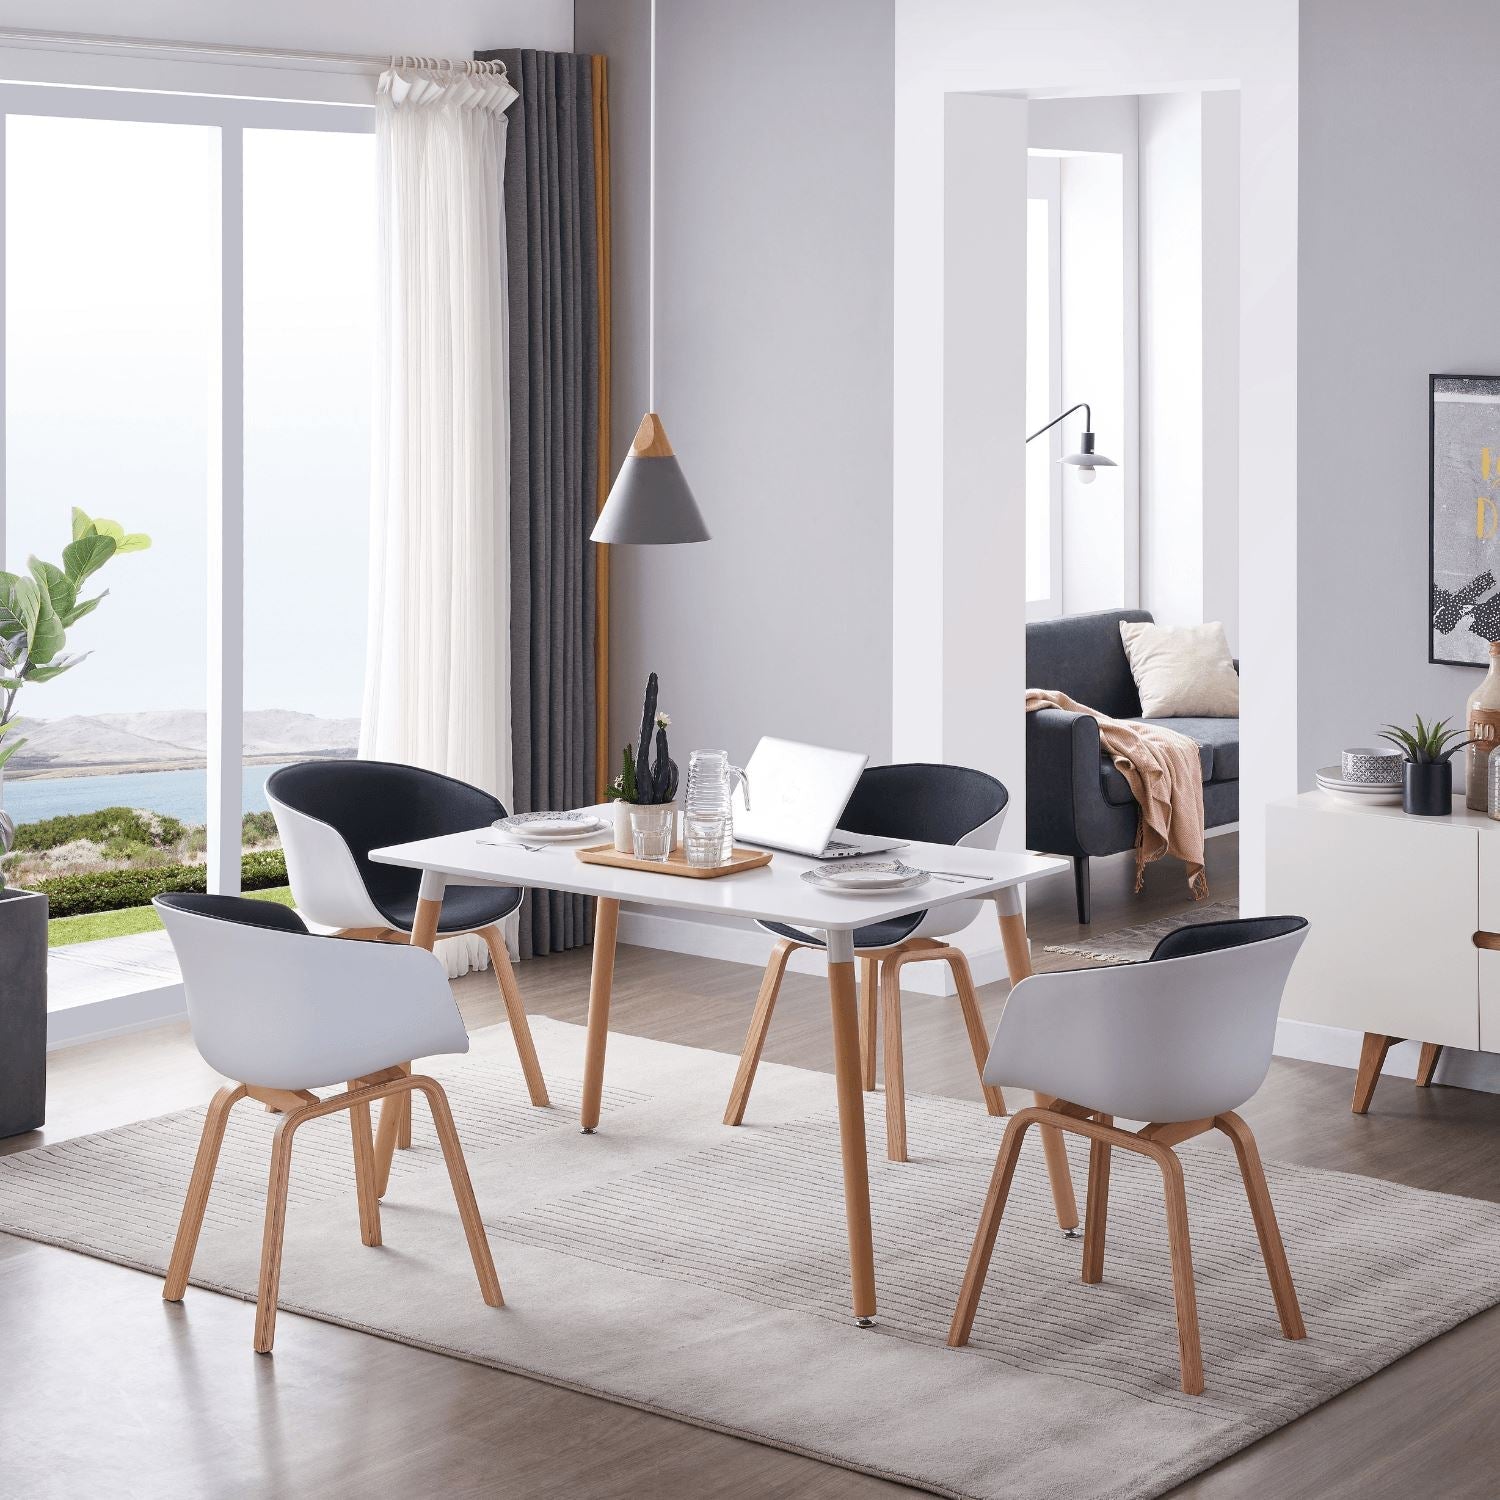 Valure Dining Table - Valyou 